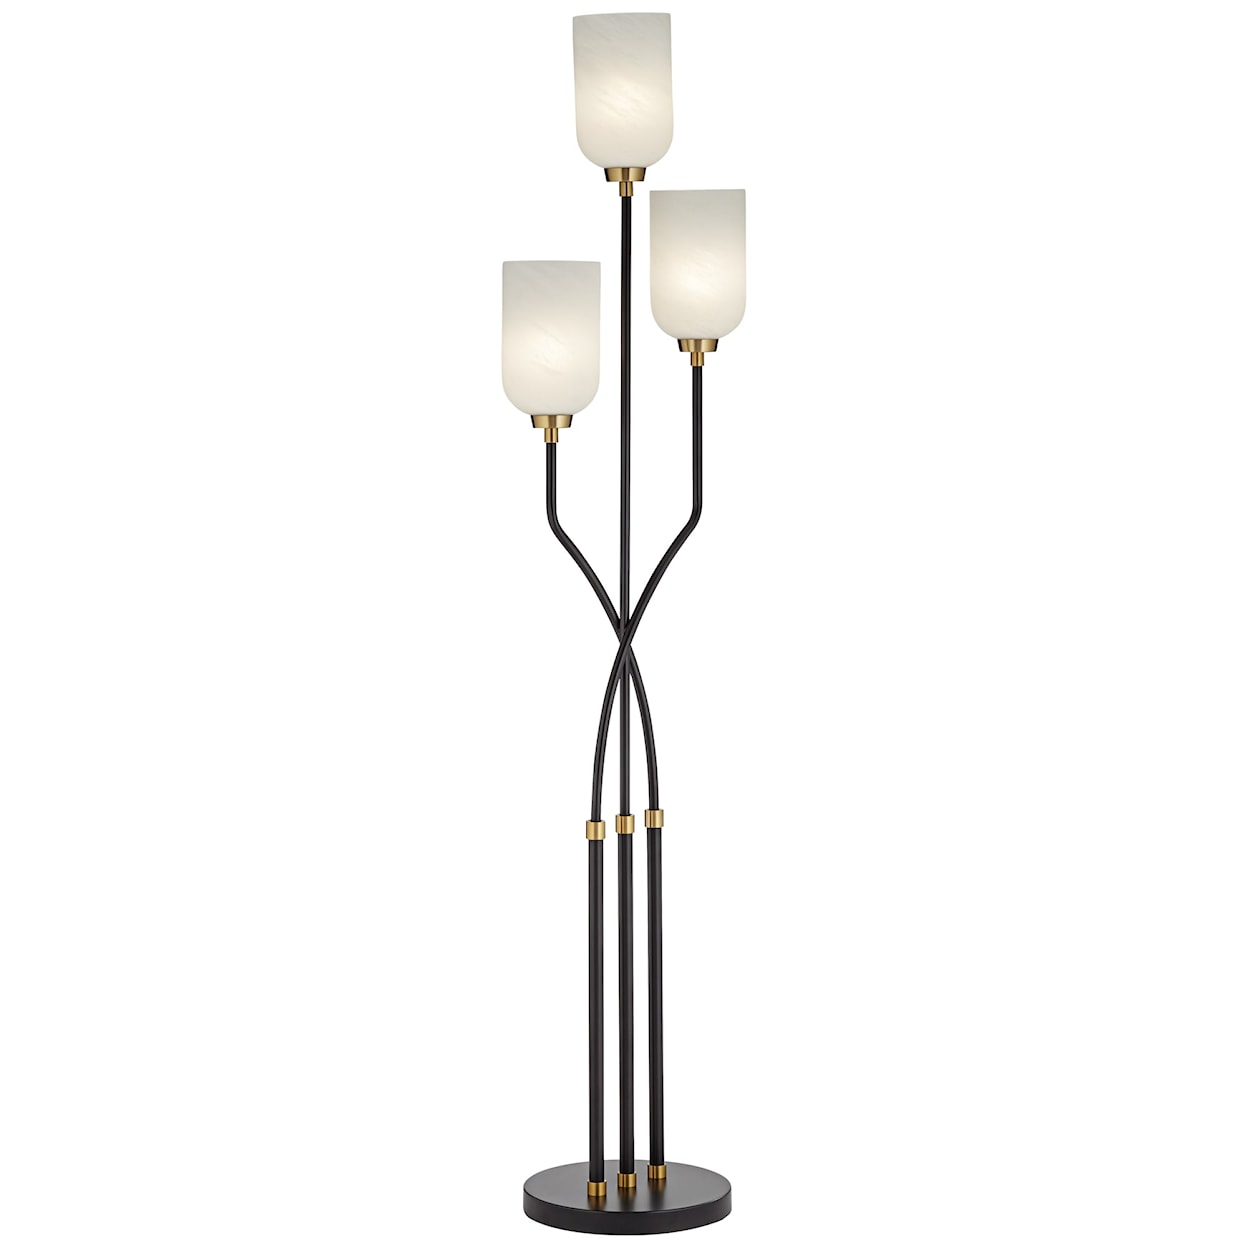 Pacific Coast Lighting Pacific Coast Lighting FL-3 Light with White Alabaster